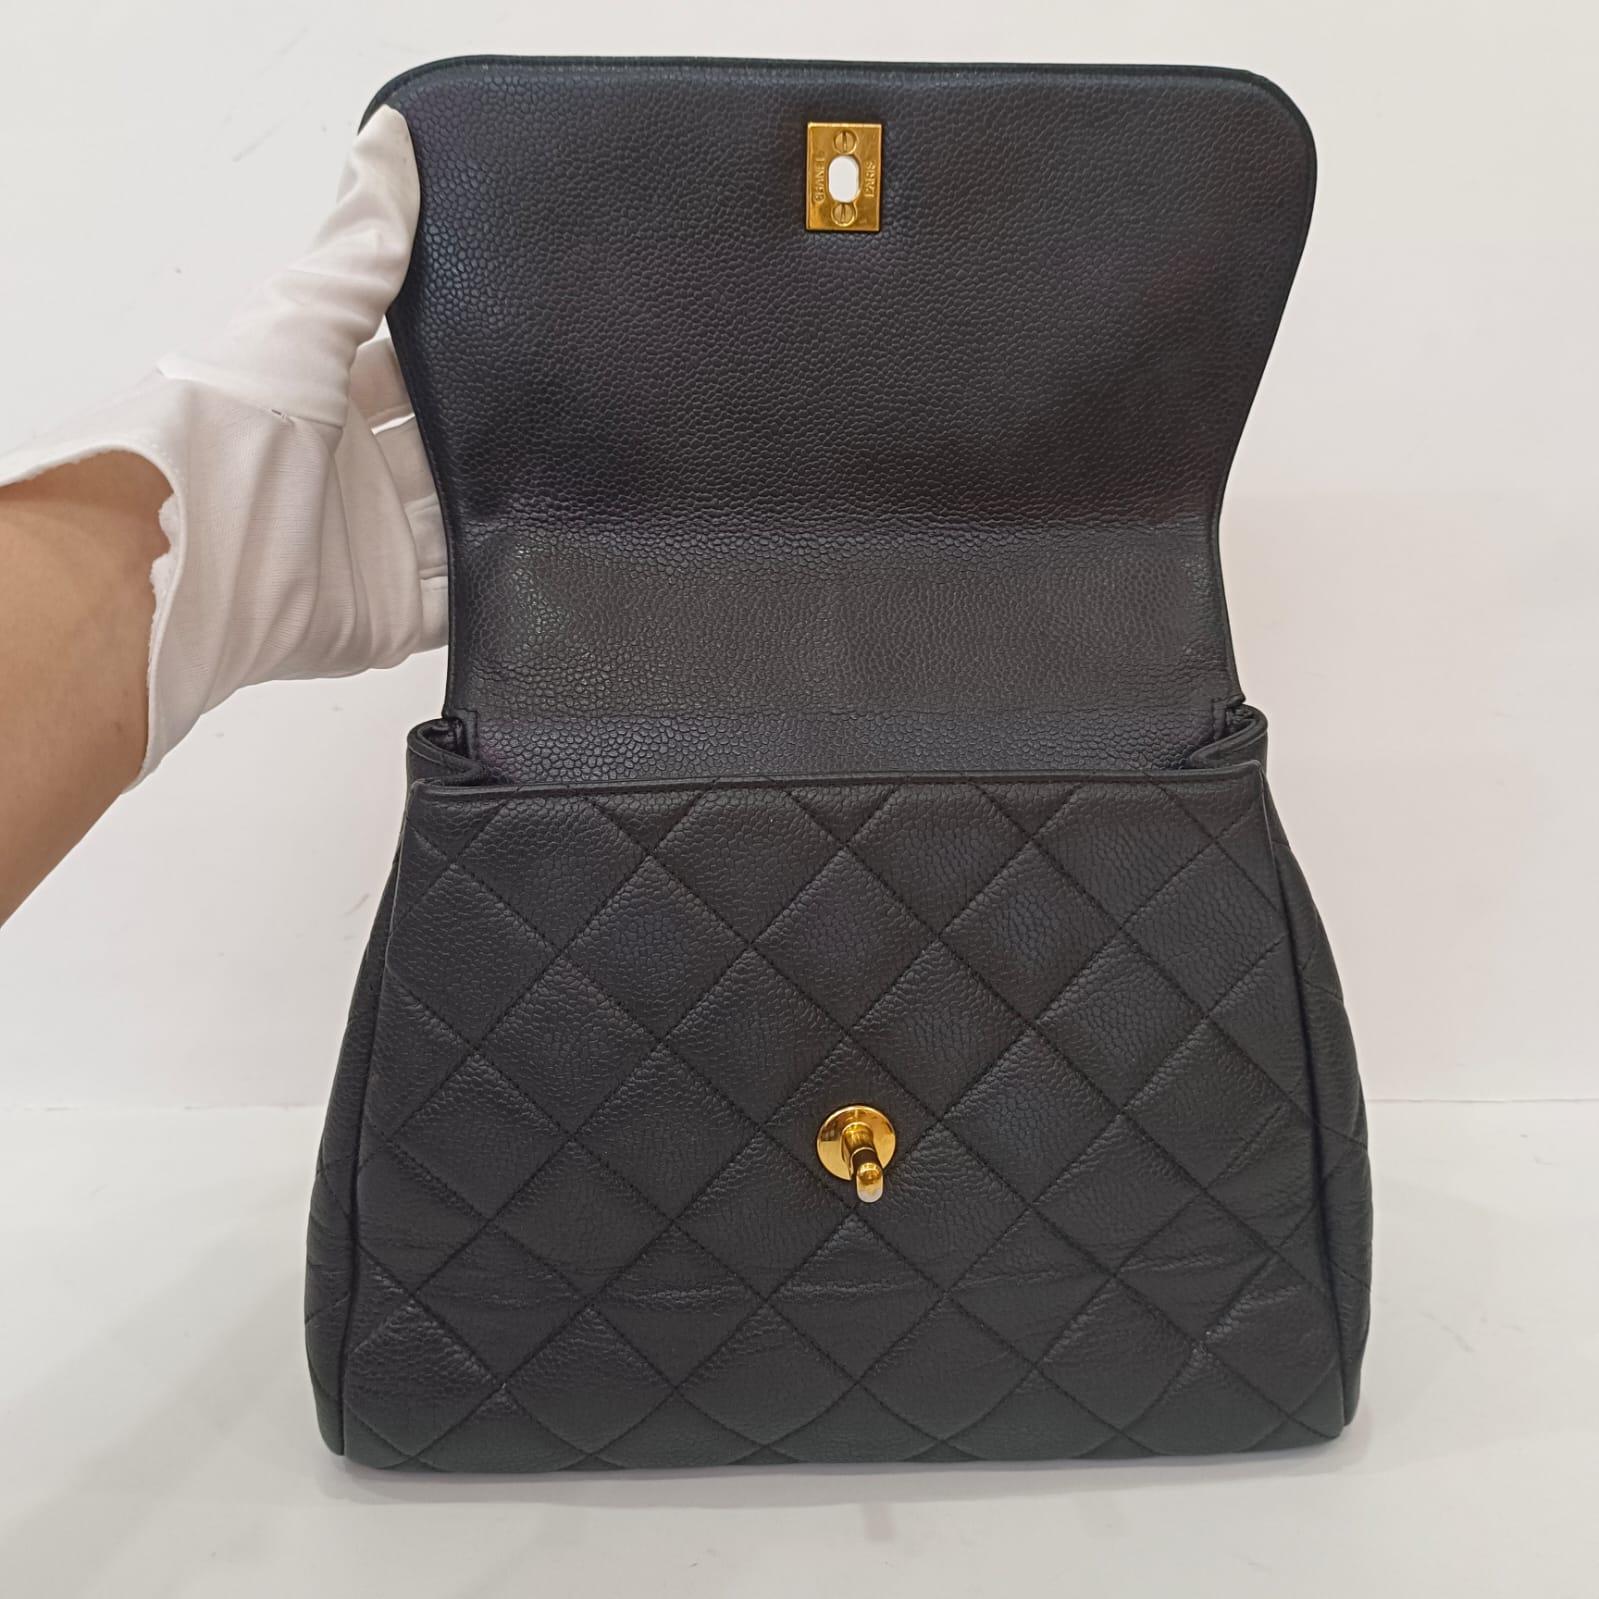 Vintage Chanel Black Caviar Quilted Top Handle Flap Bag For Sale 3